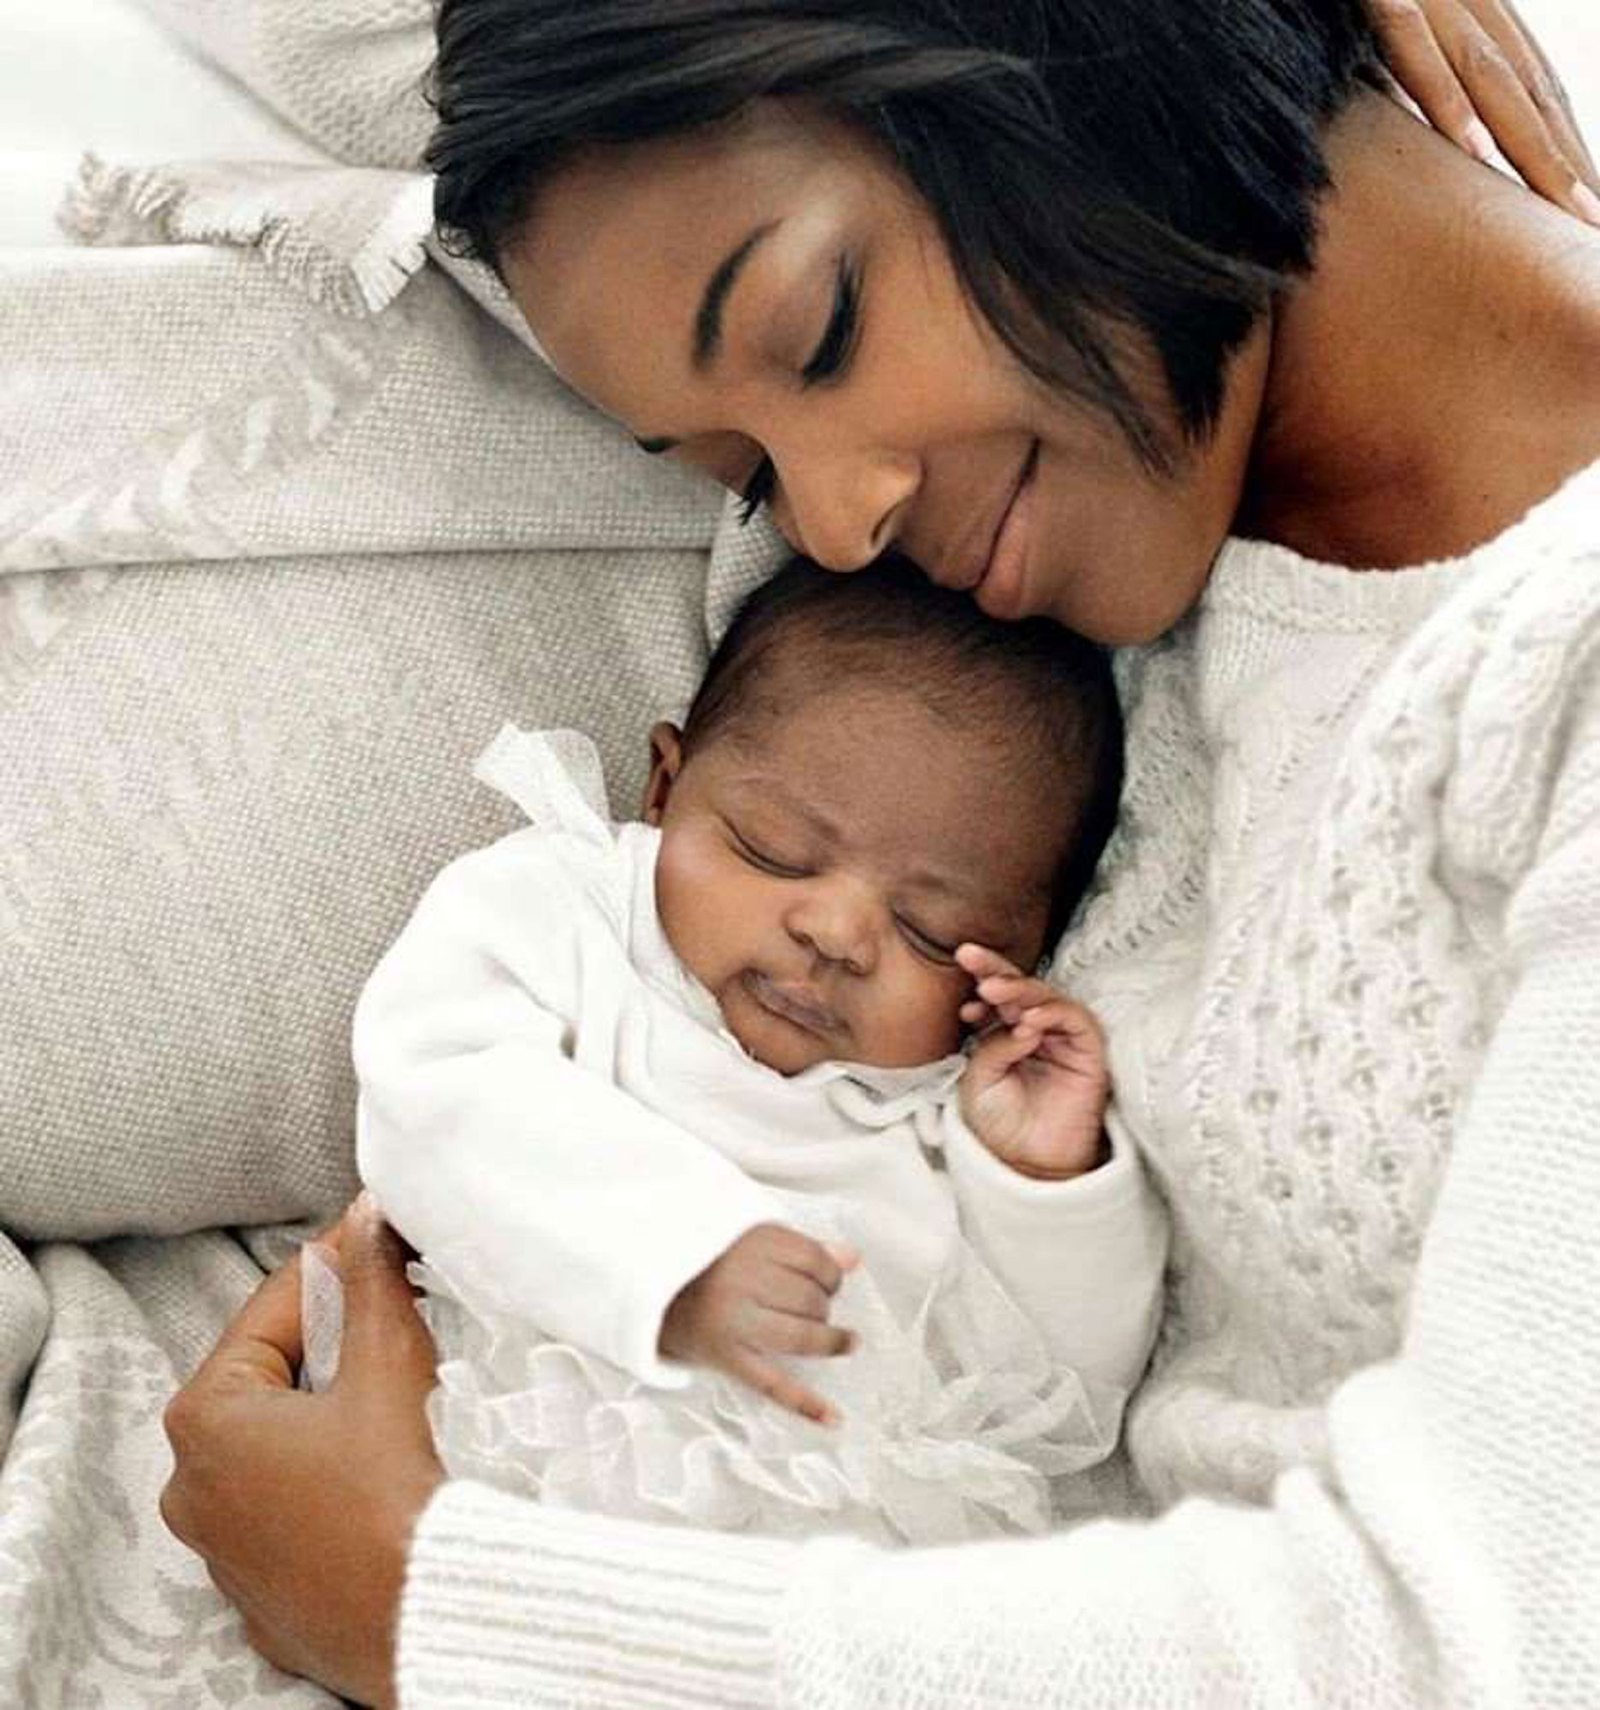 Gabrielle Union Wade Moms Reflect on Postpartum in Life After Birth